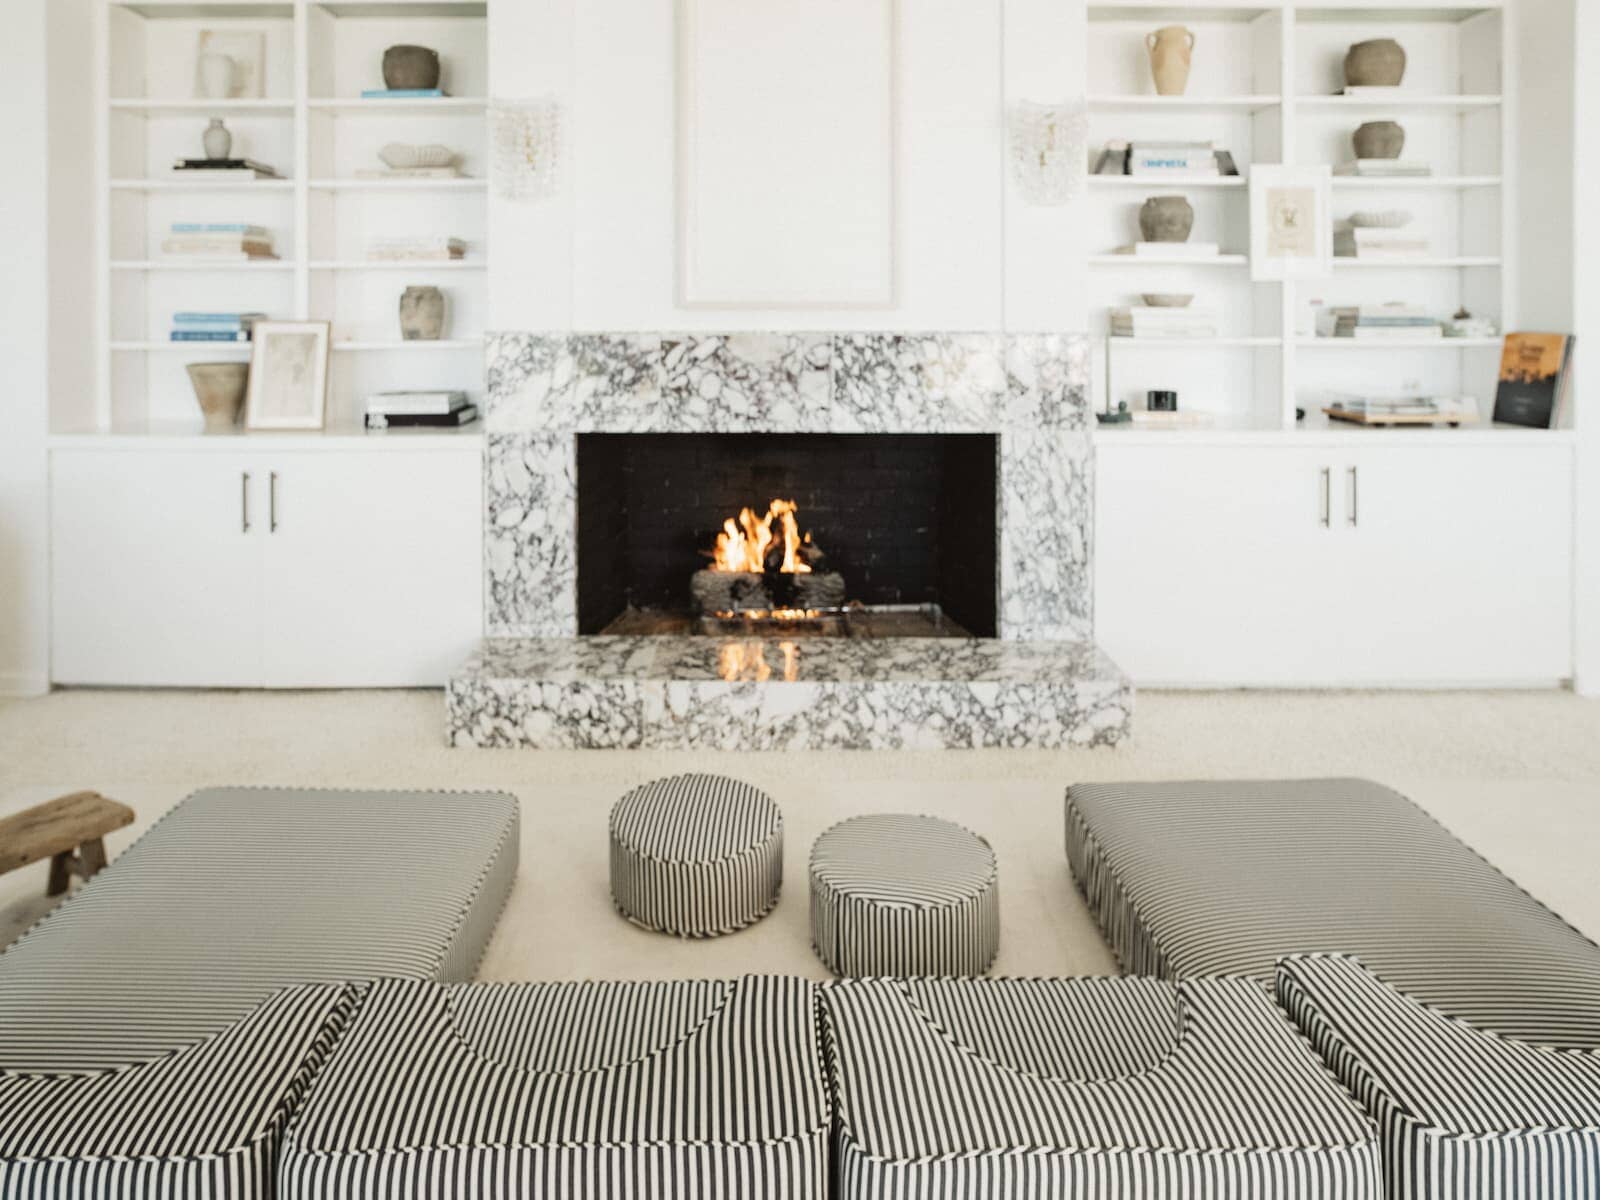 The navy stripe modular pillow stack arranged in front of a living room fire place